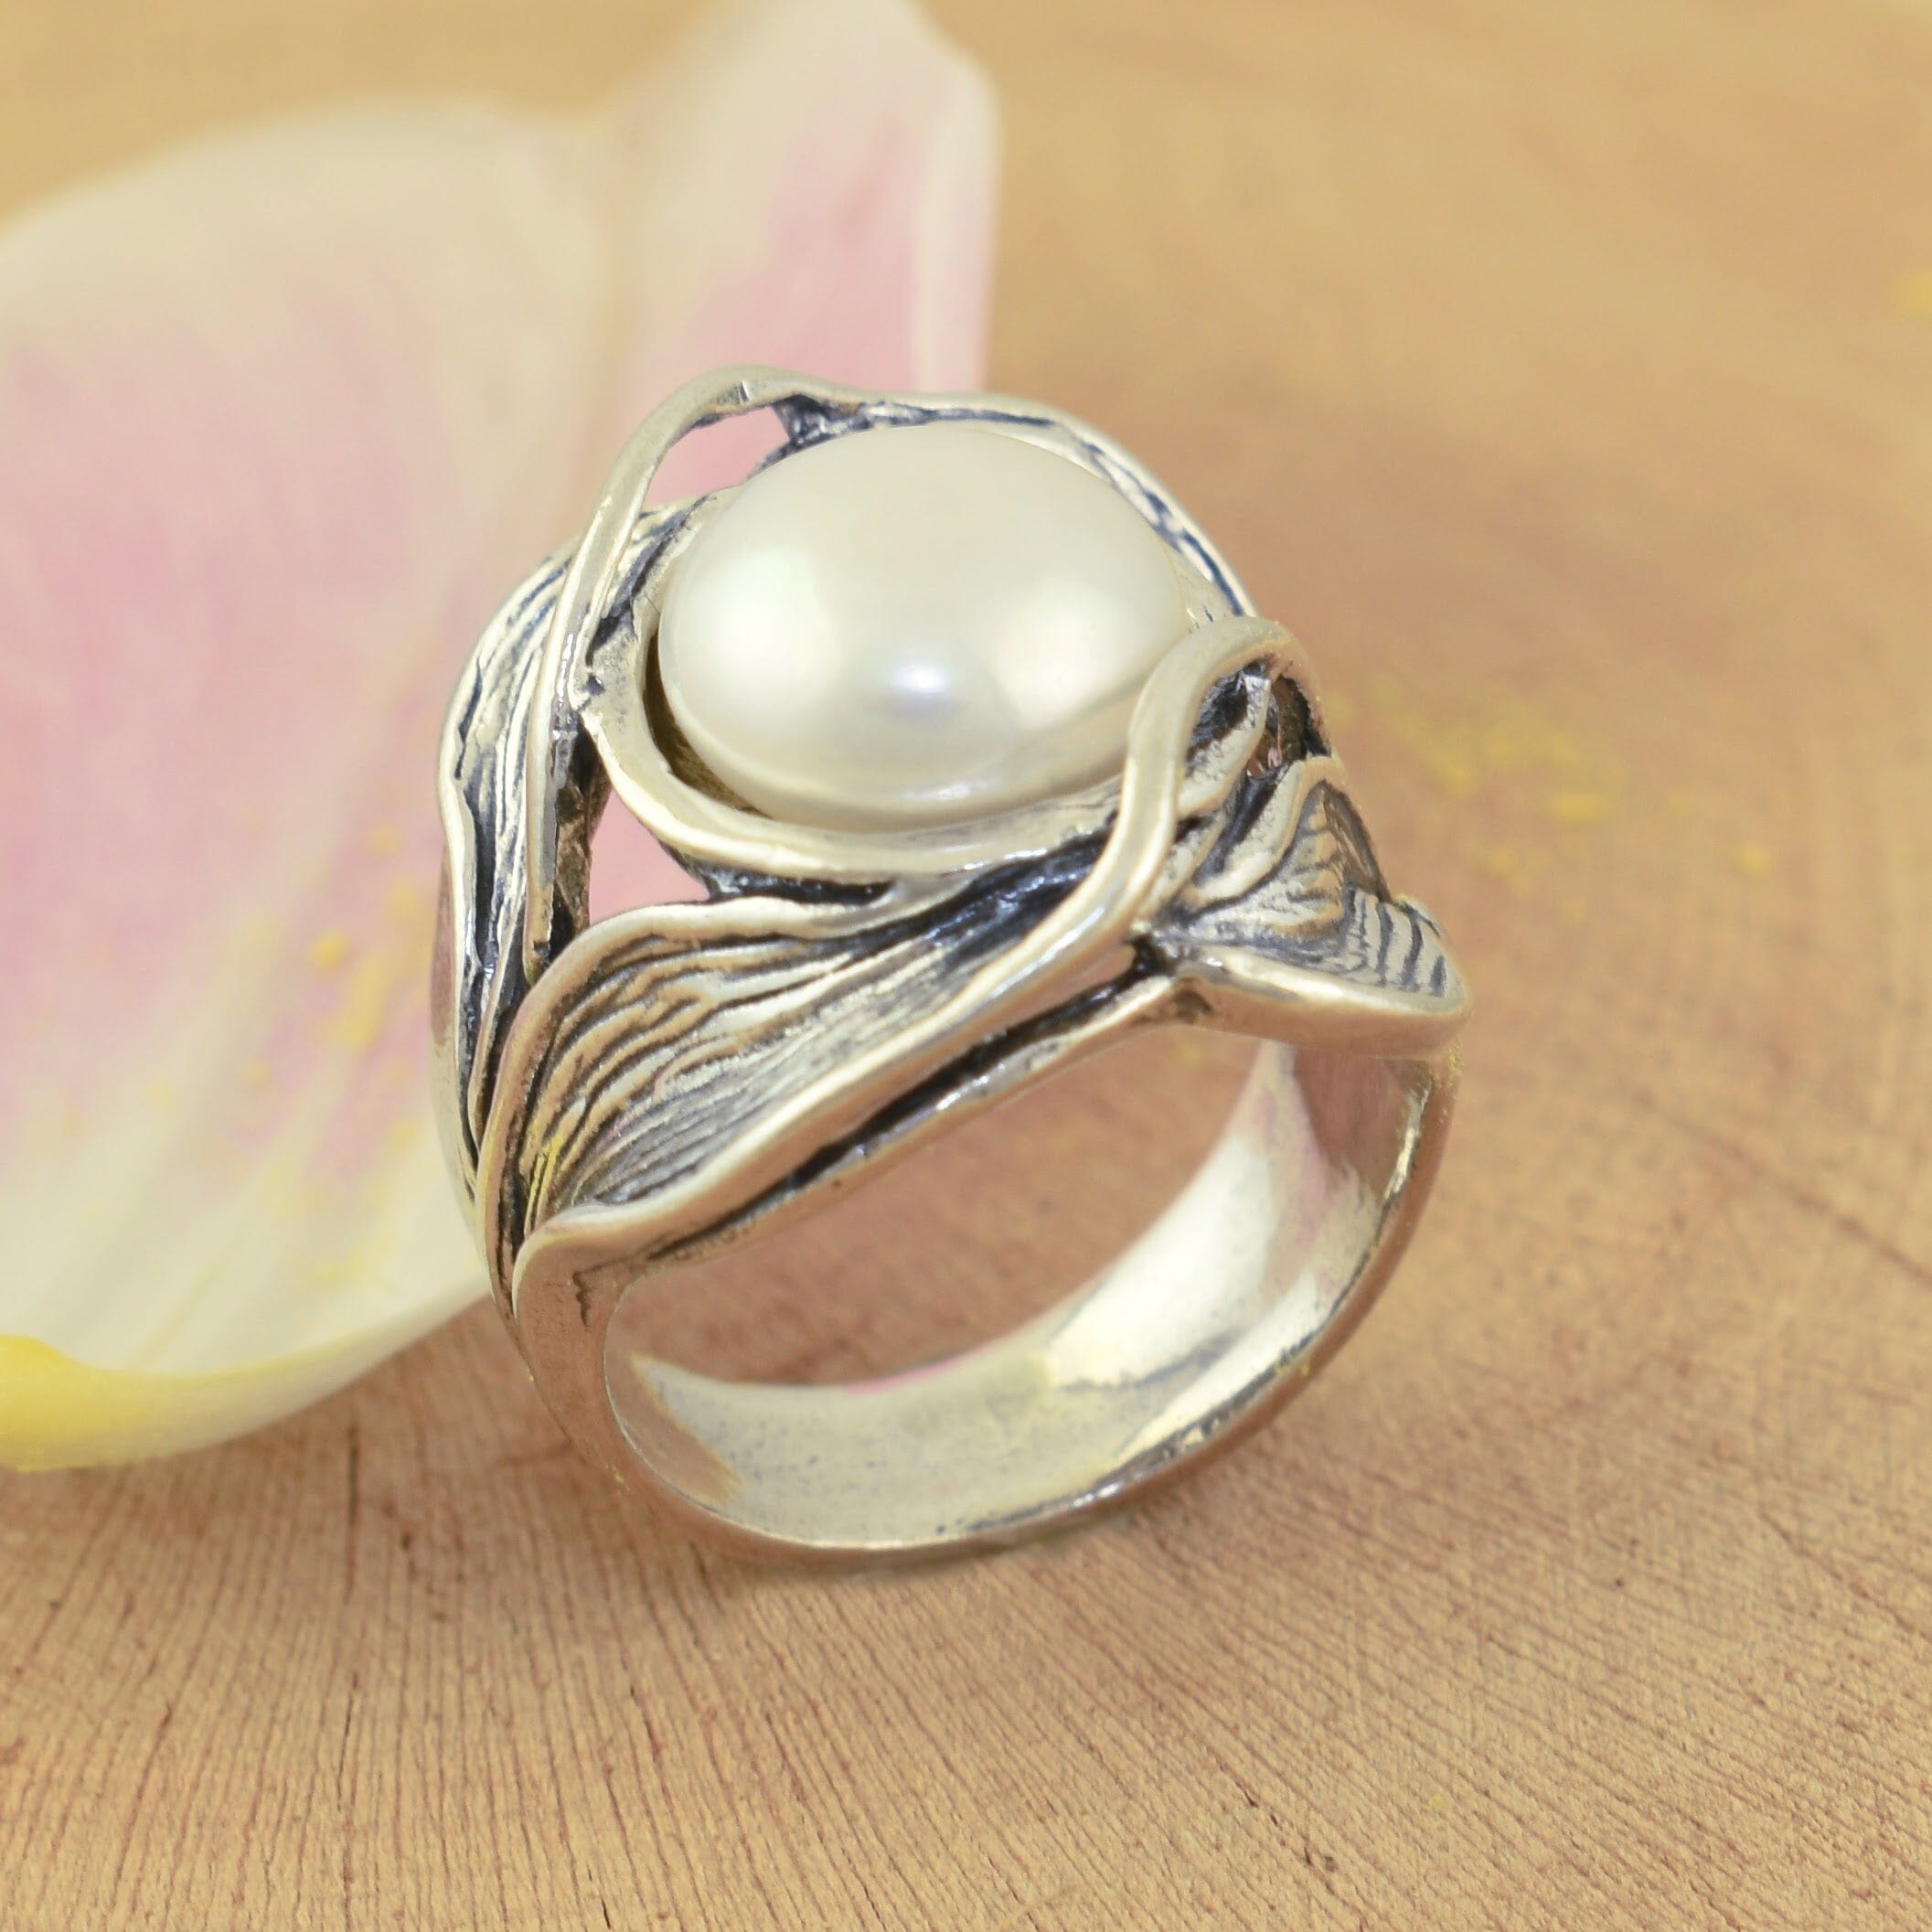 Handcrafted sterling silver and pearl ring